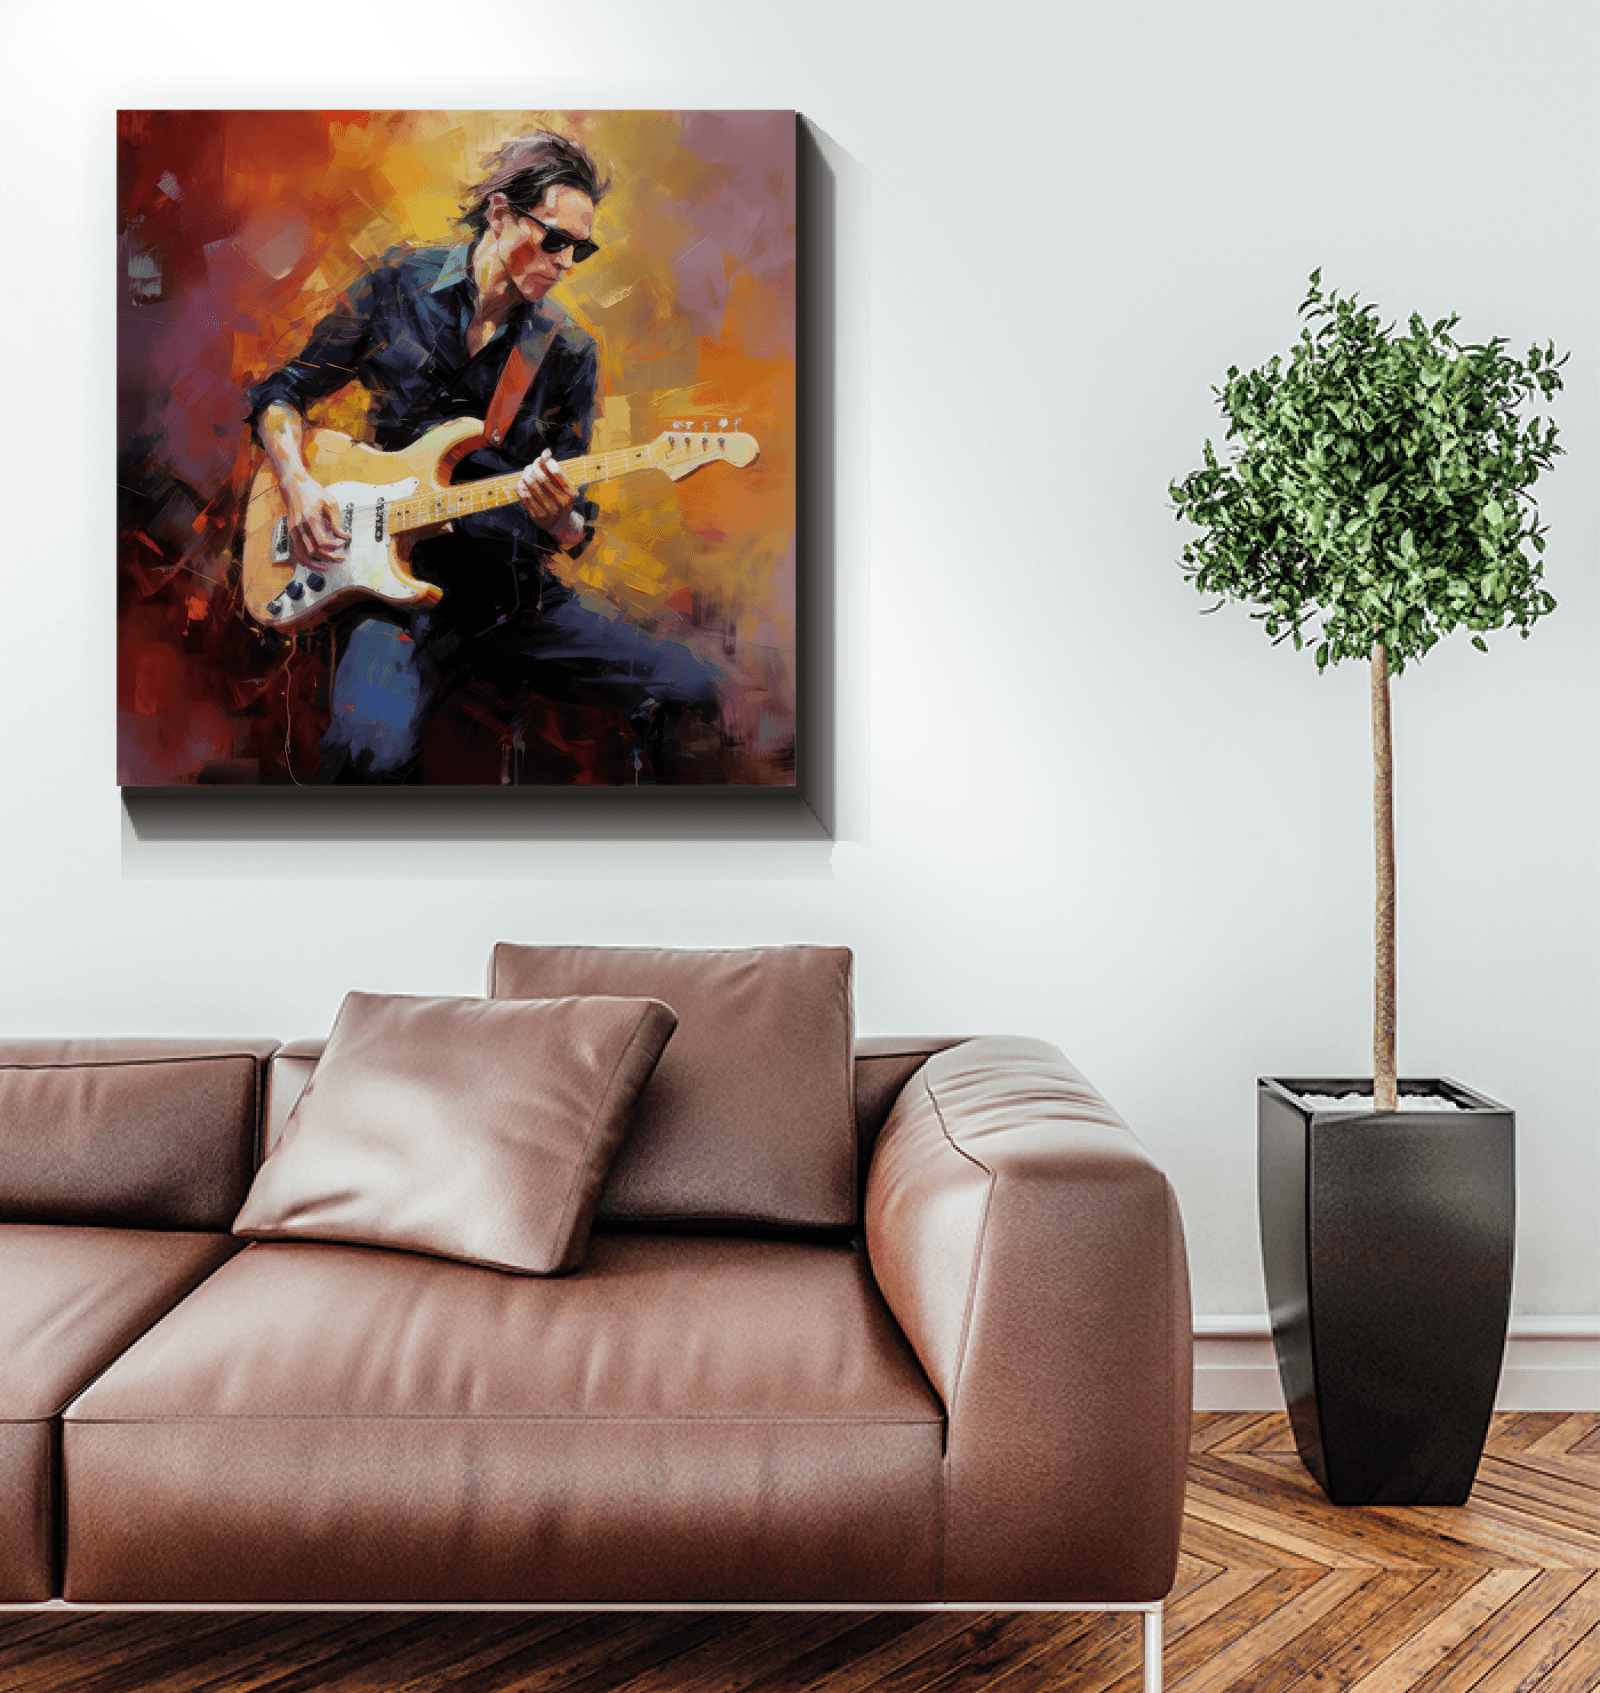 Decorative wrapped canvas with guitar showcase design